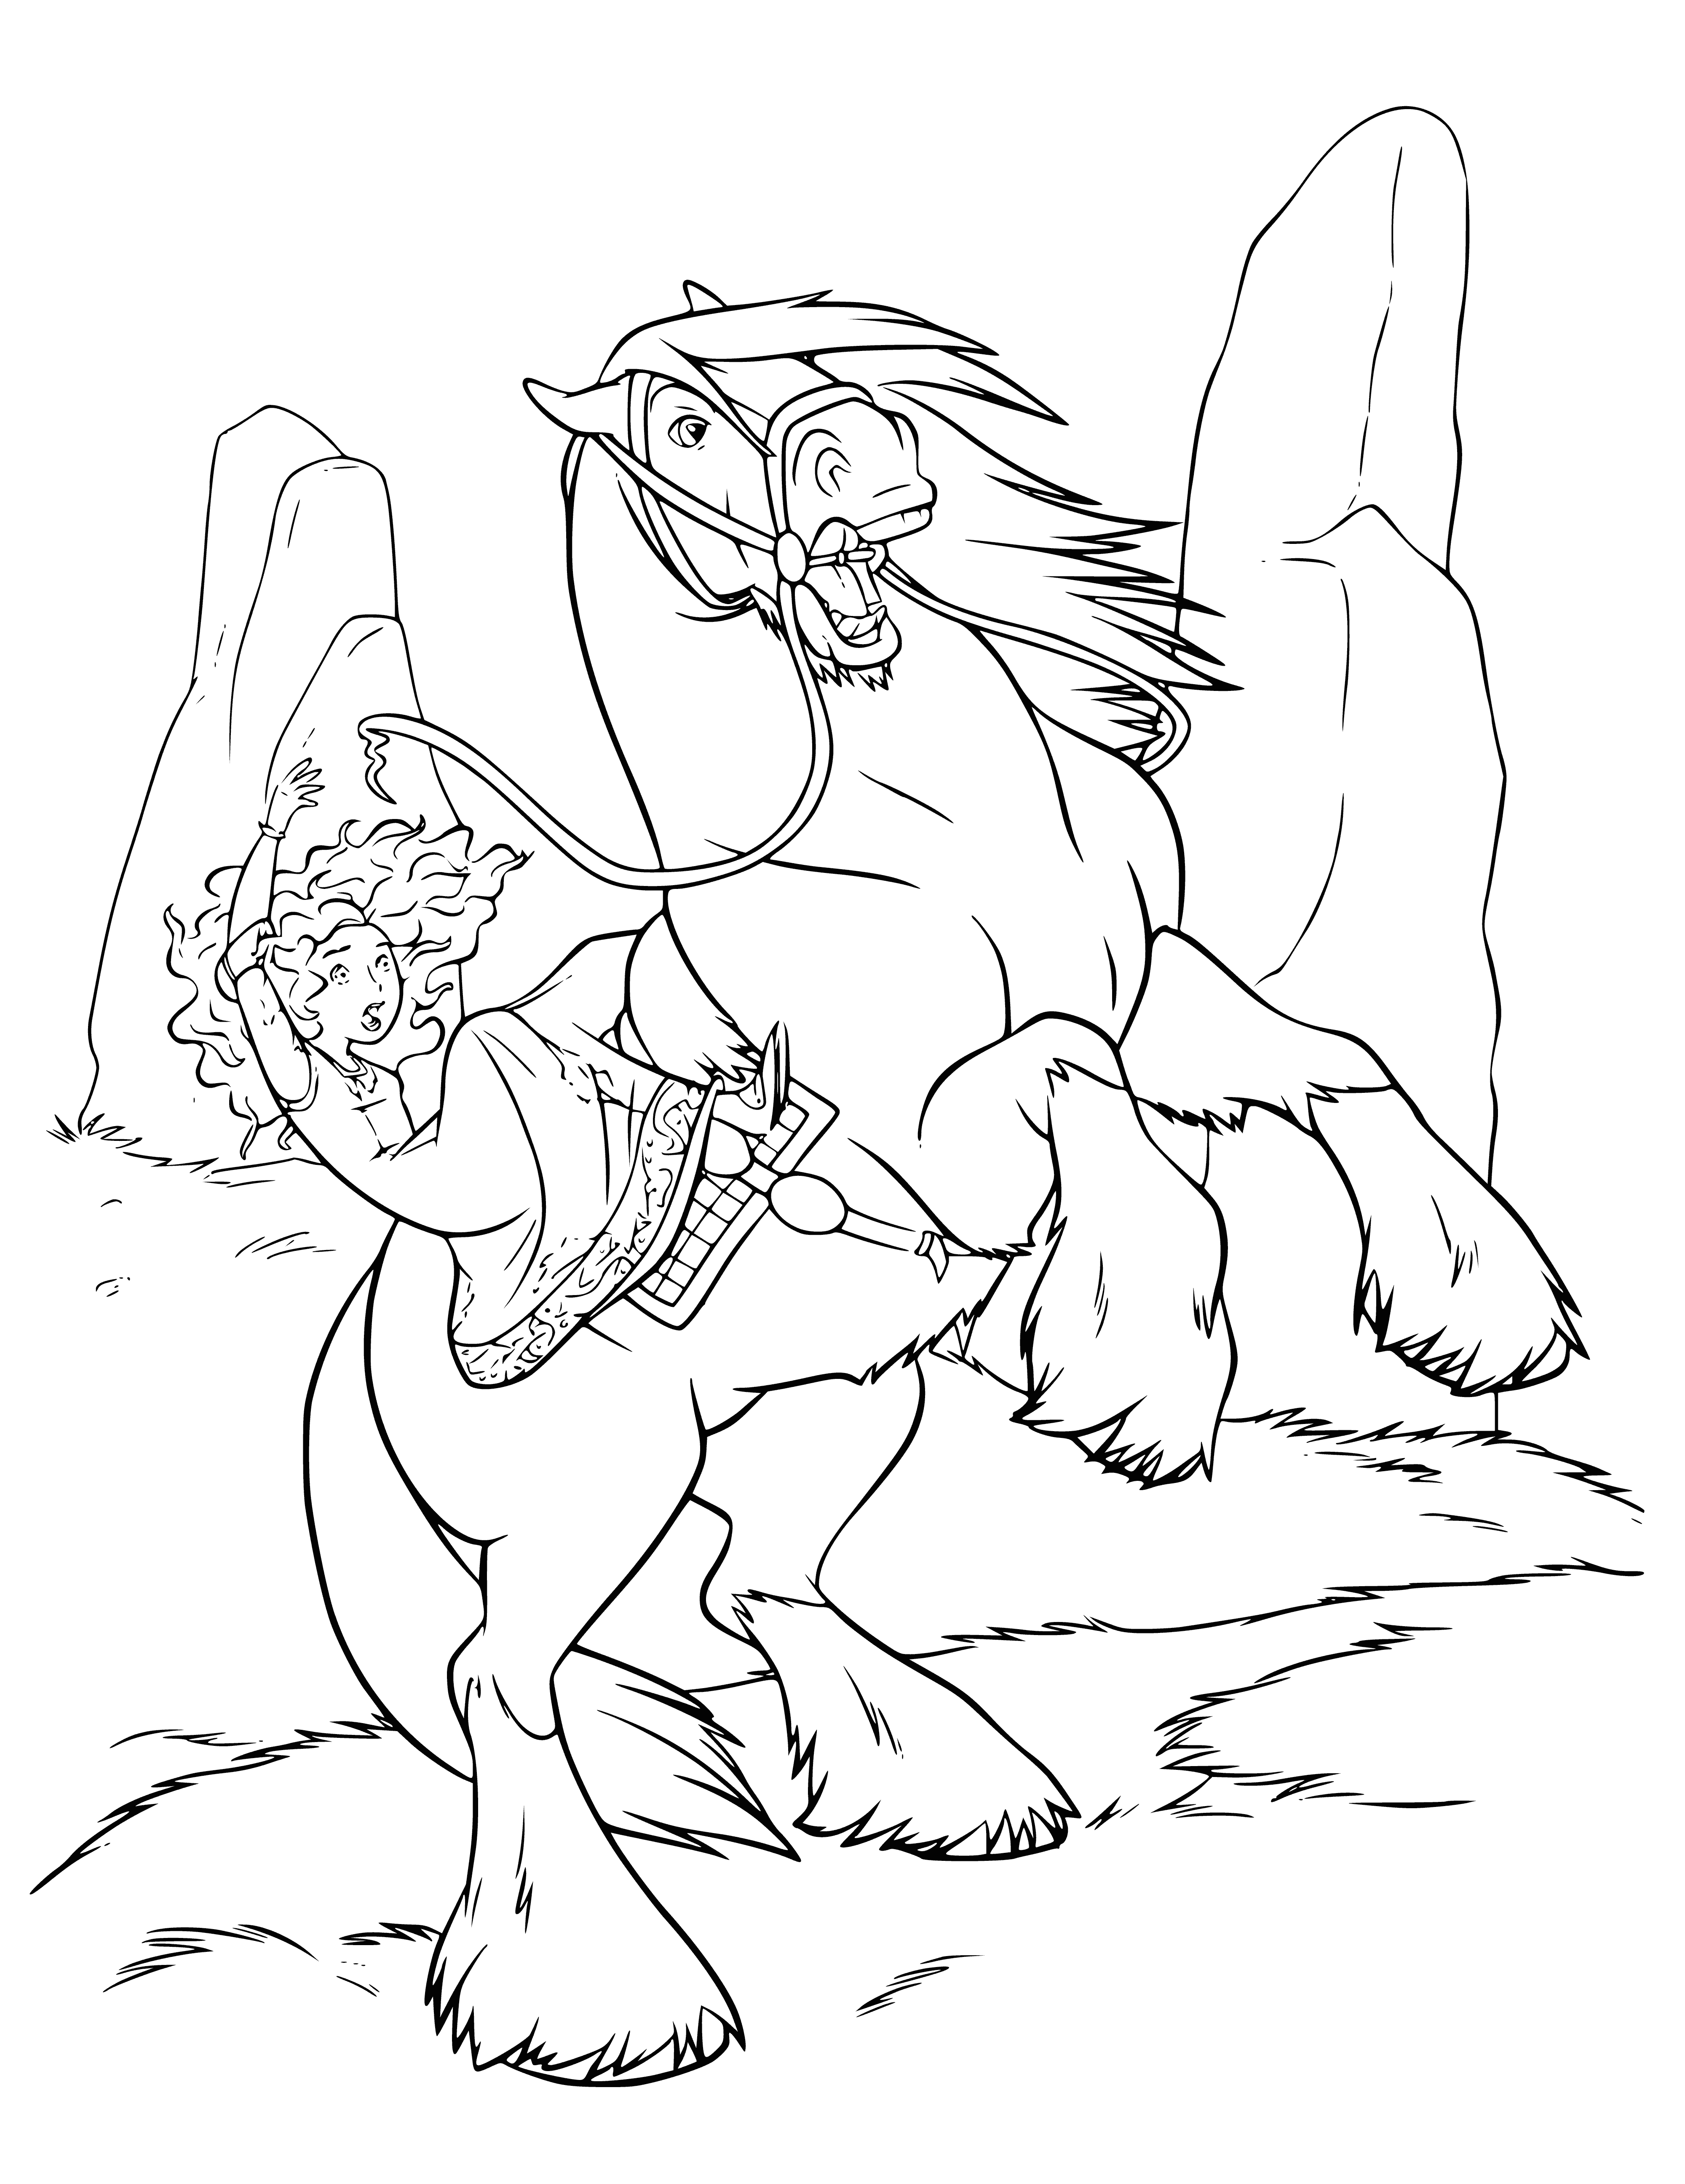 coloring page: Majestic and fearless, it looked ready to take on anything.

Majestic horse defies all odds, rearing on its hind legs to take on the world.